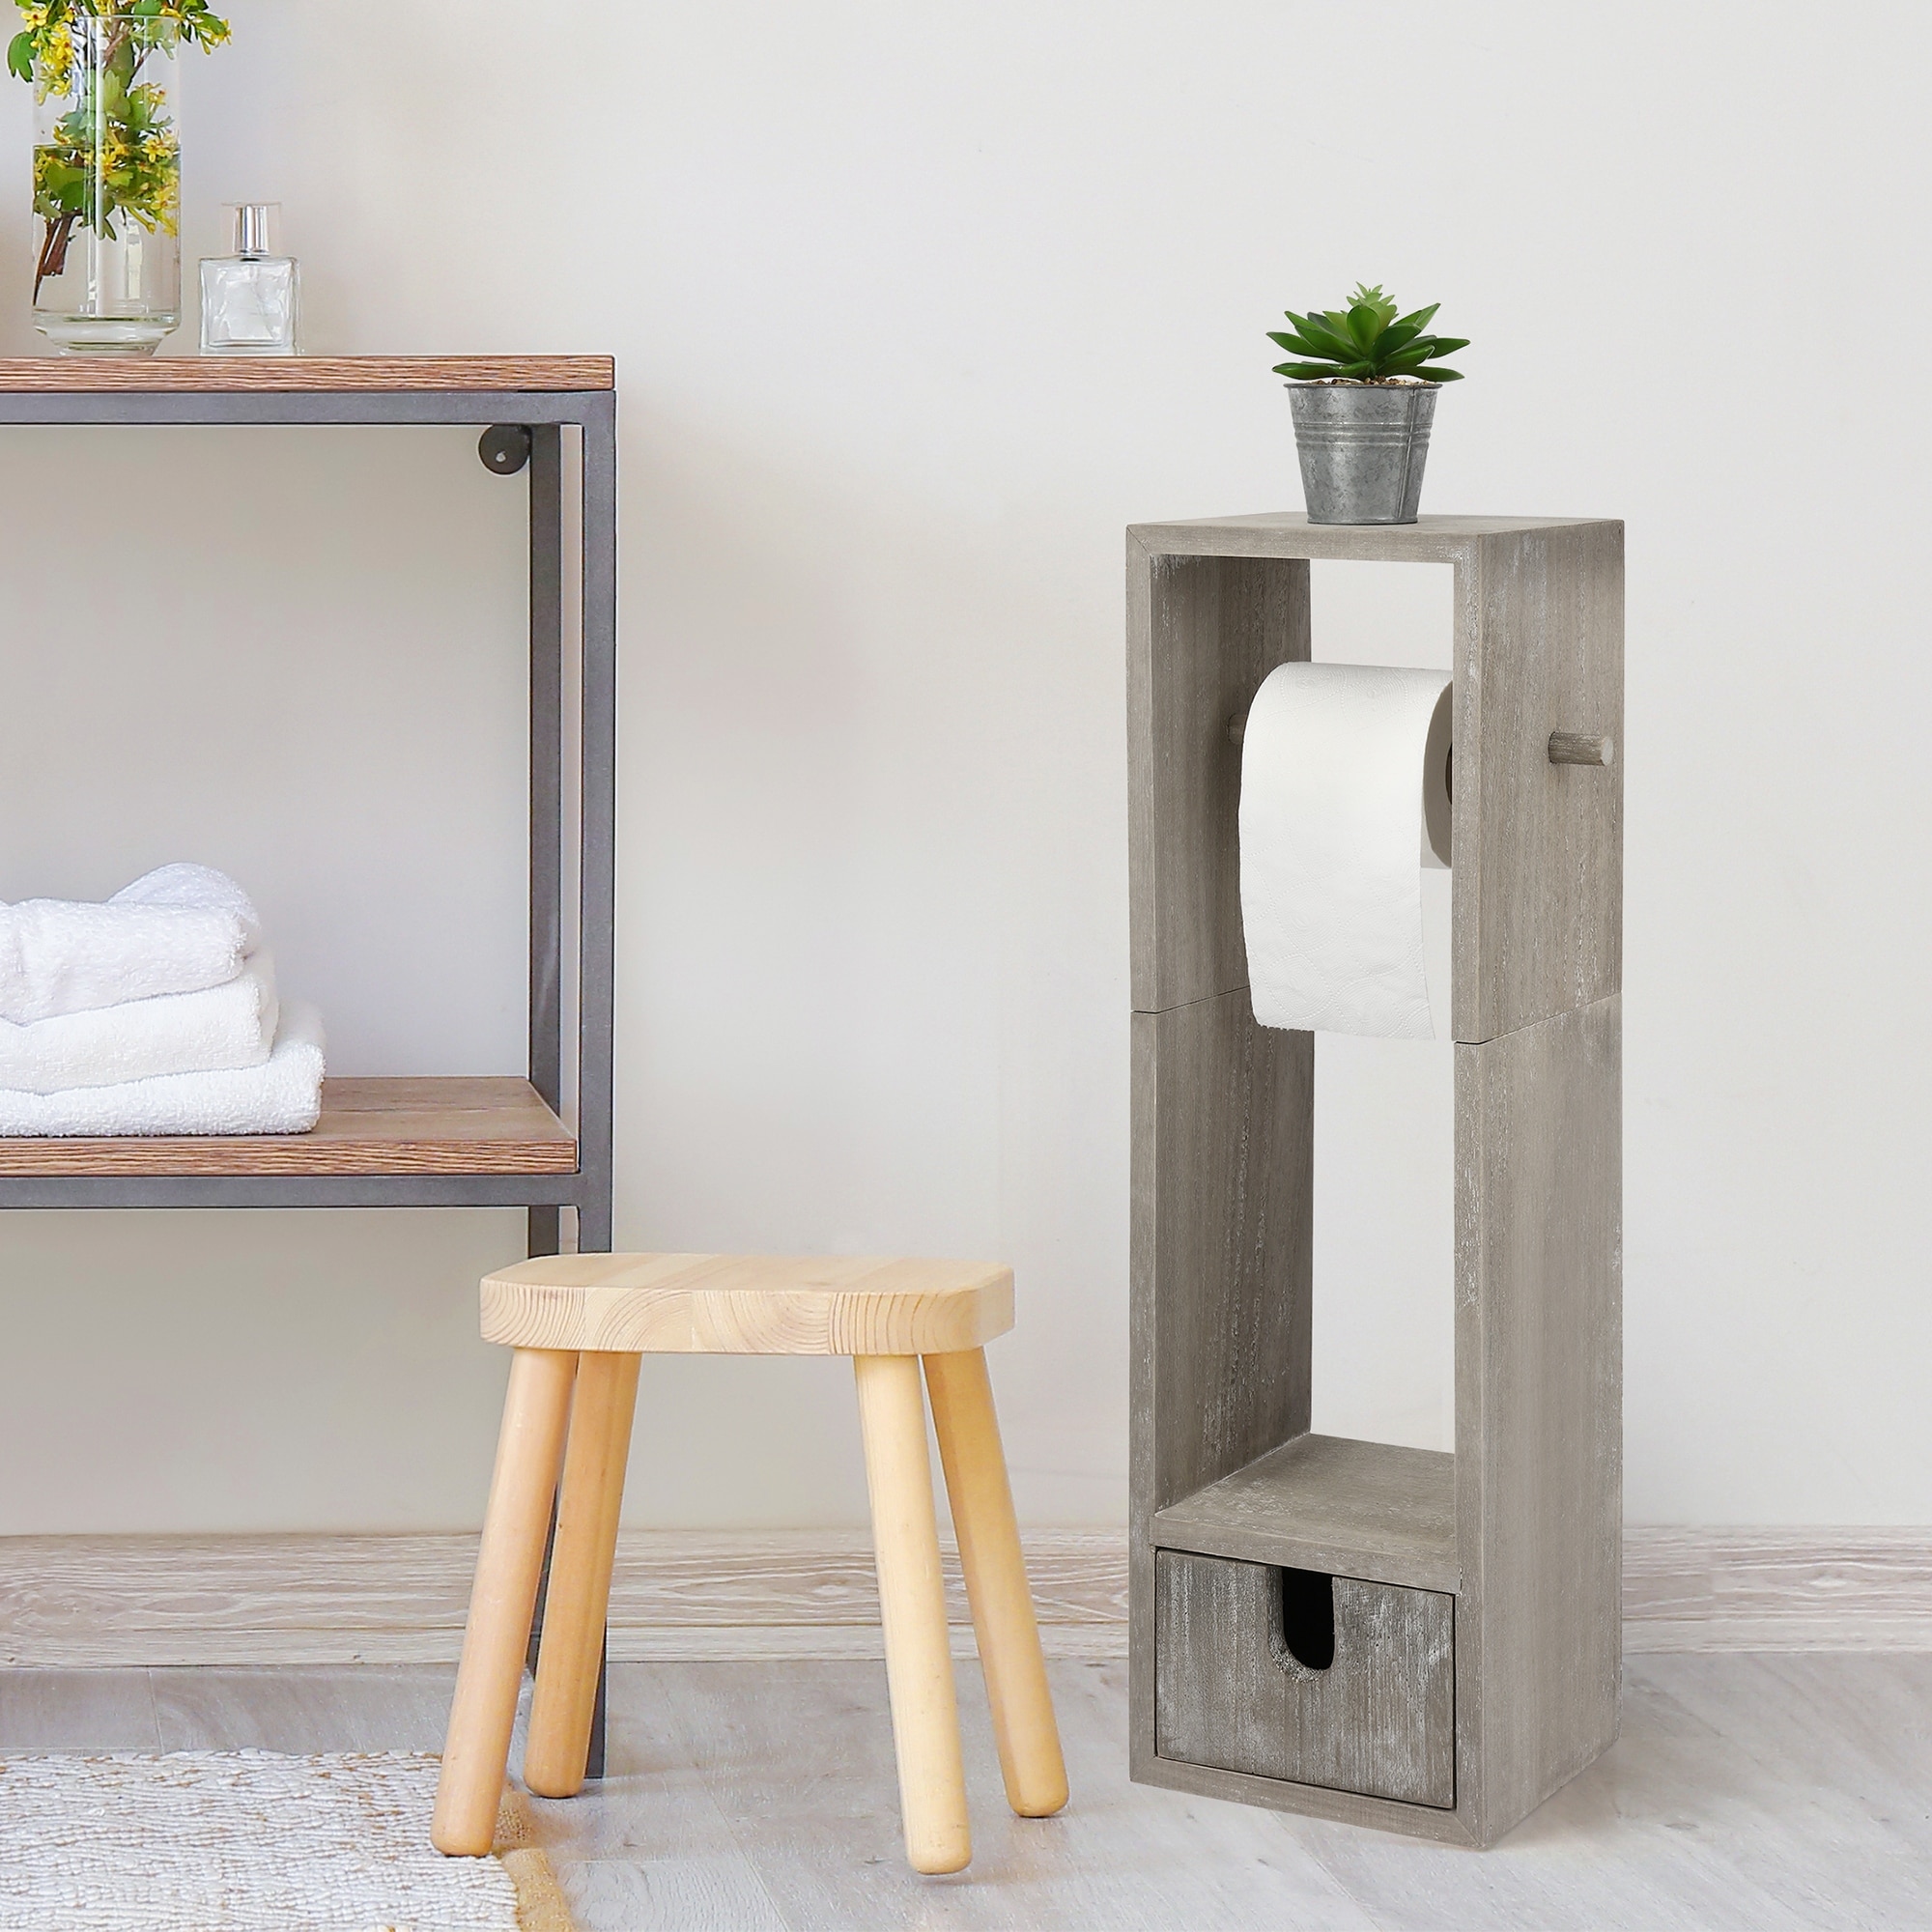 https://ak1.ostkcdn.com/images/products/is/images/direct/3e6becff448759cc5eea801052cfa3270d5a8982/Wood-Free-Standing-Toilet-Paper-Roll-Holder-with-Drawer.jpg